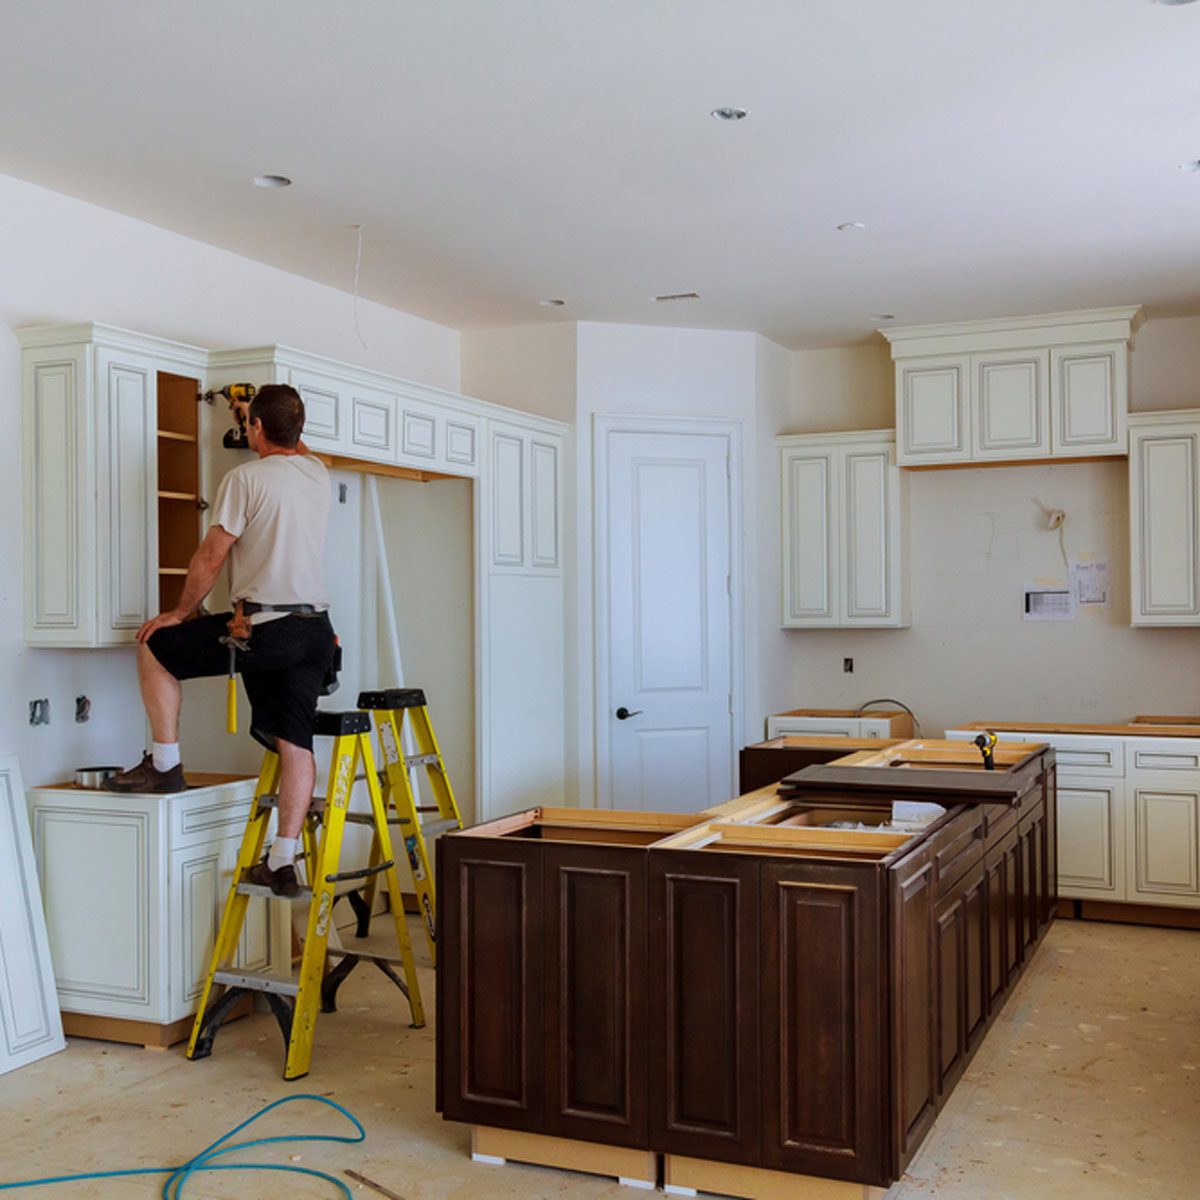 4 financial lessons I learned while renovating my kitchen